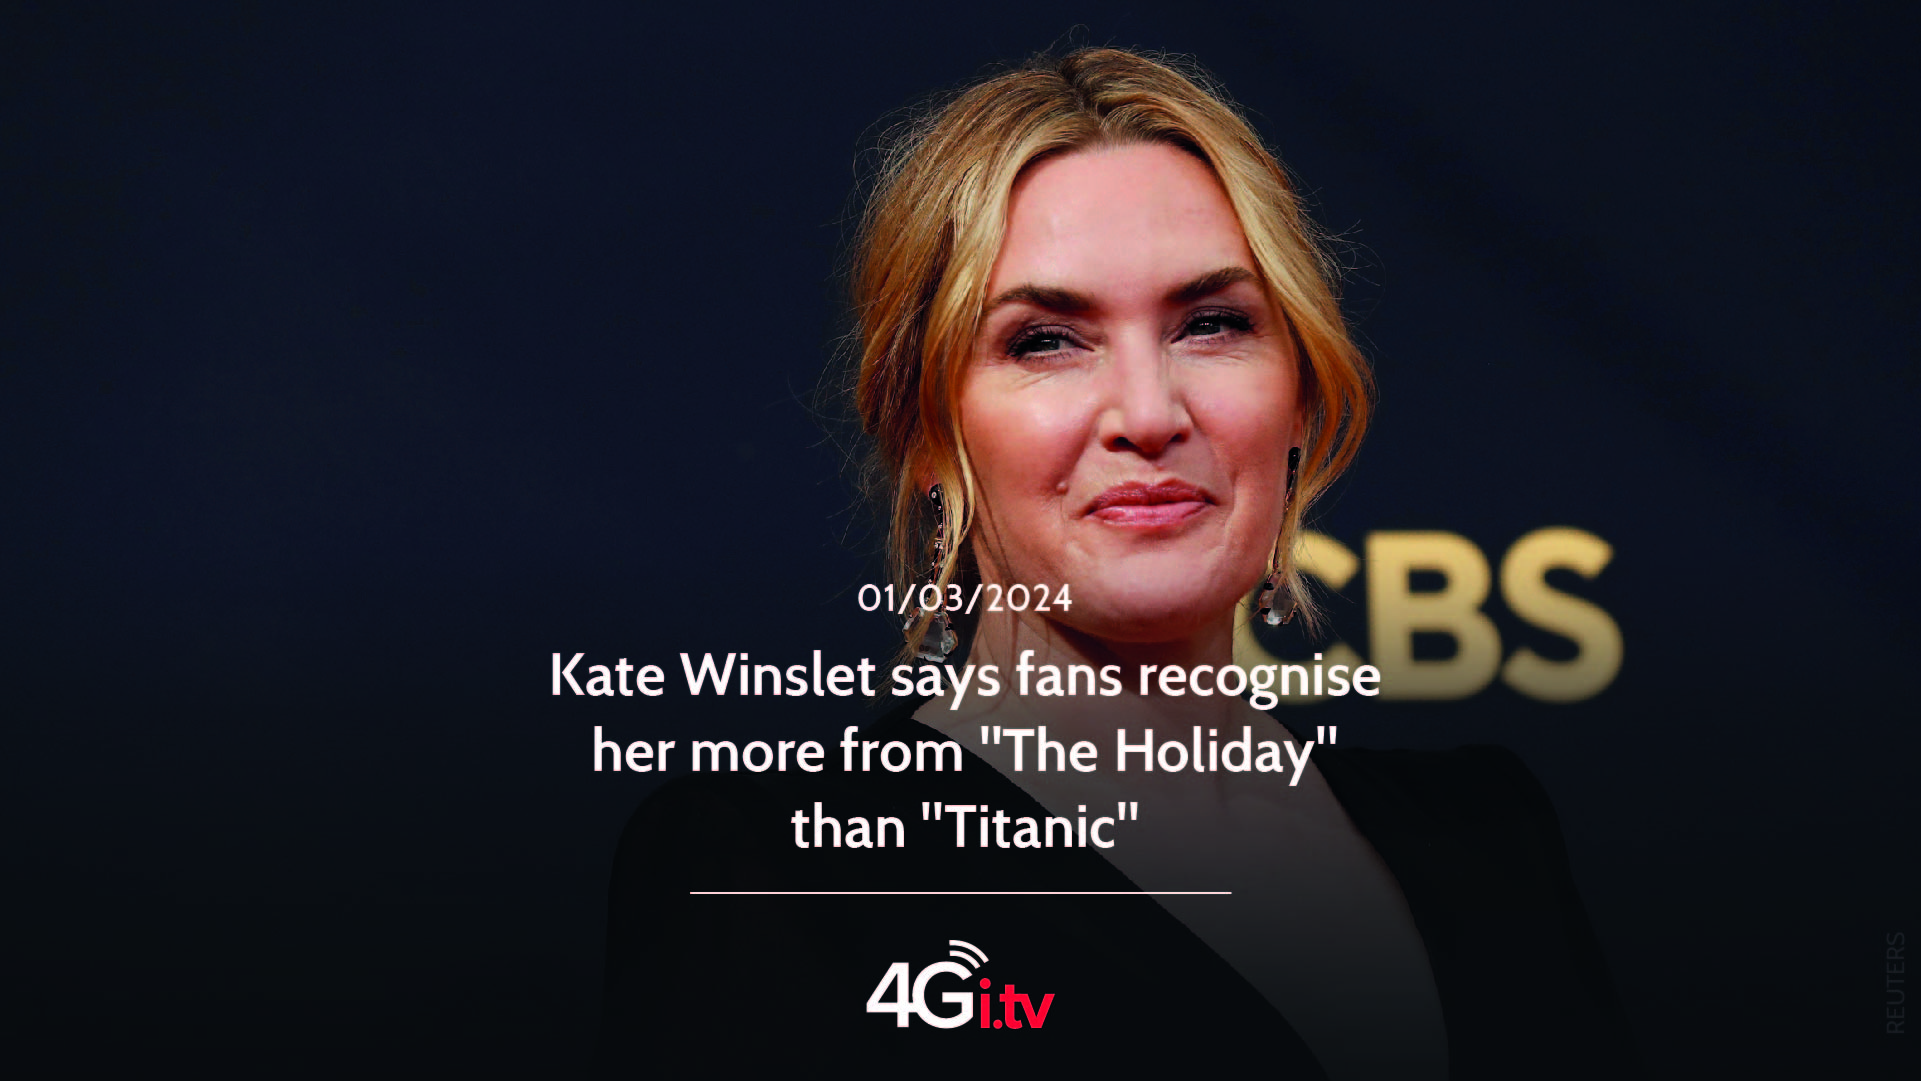 Lesen Sie mehr über den Artikel Kate Winslet says fans recognise her more from “The Holiday” than “Titanic”